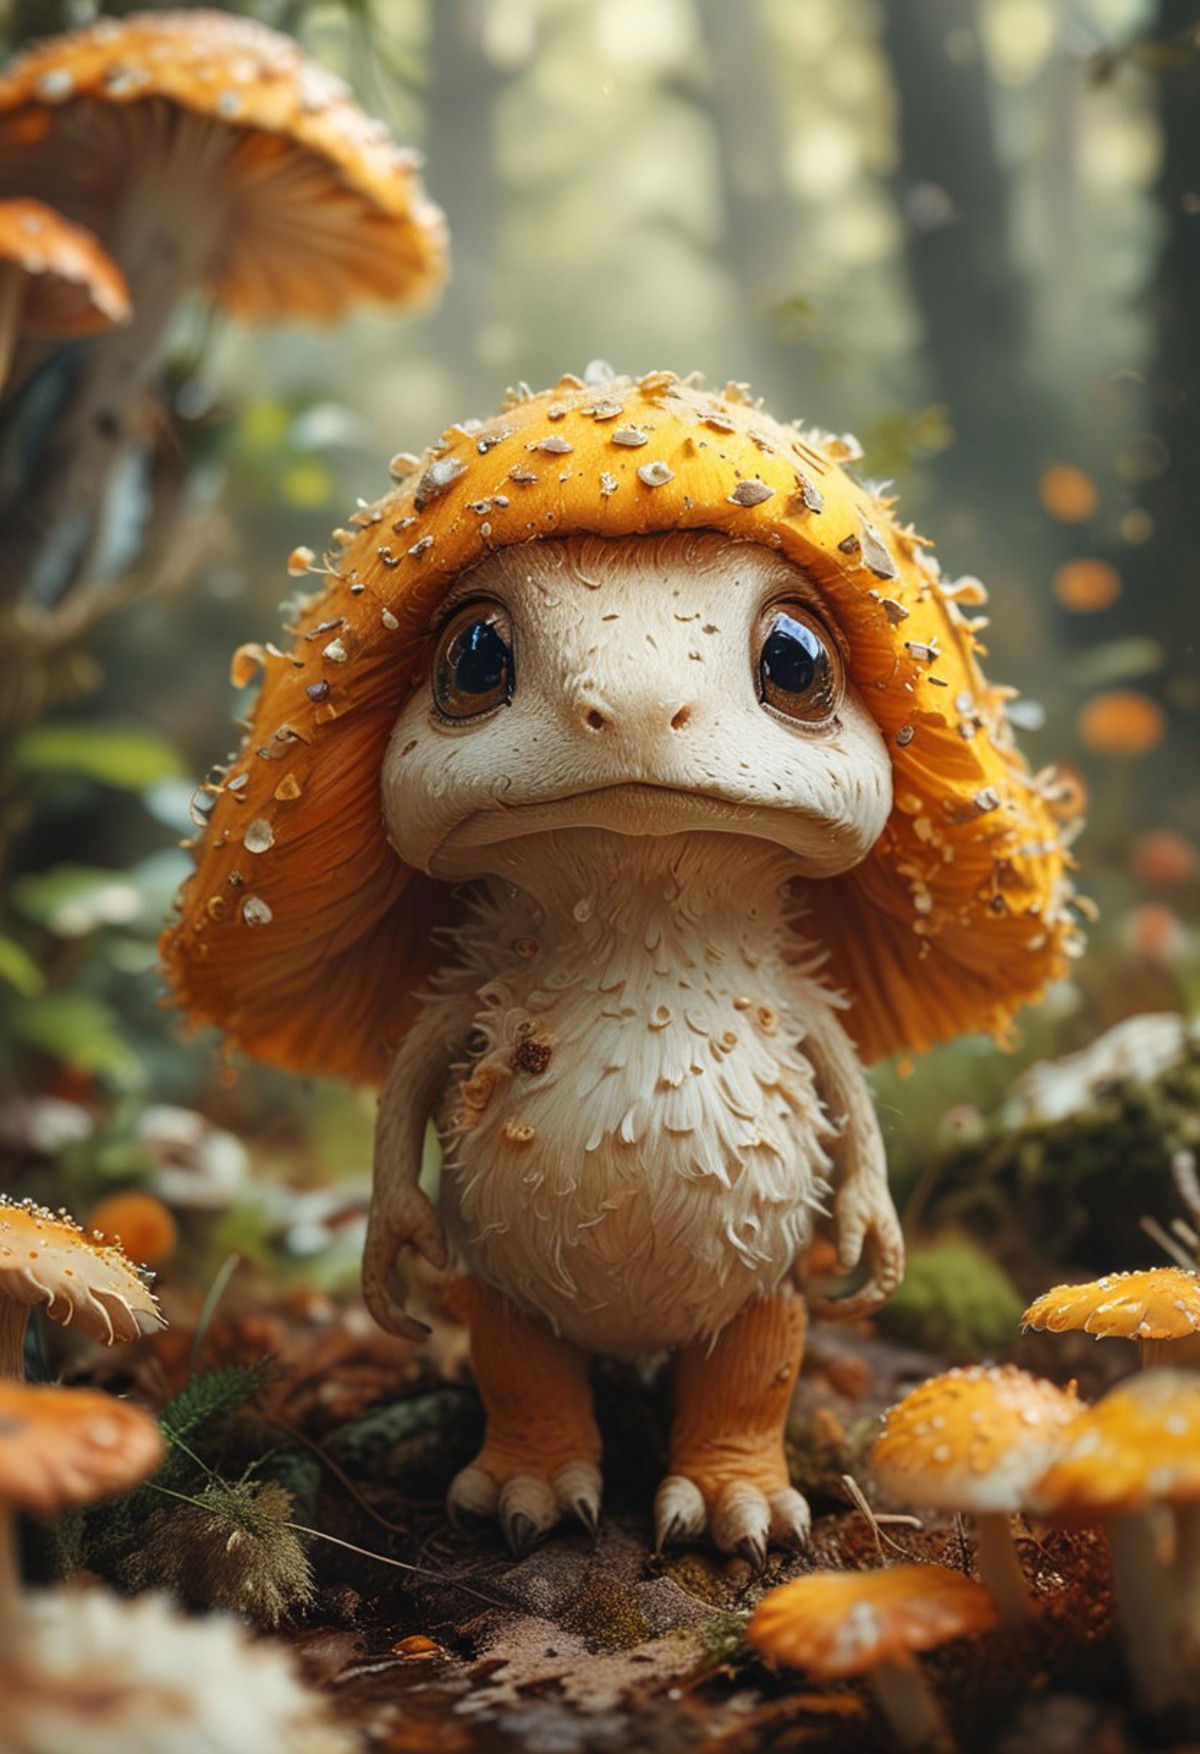 A small creature standing amidst a forest floor, surrounded by towering mushrooms. The creature appears to have a mushroom cap as part of its form, blending seamlessly with the natural surroundings. 